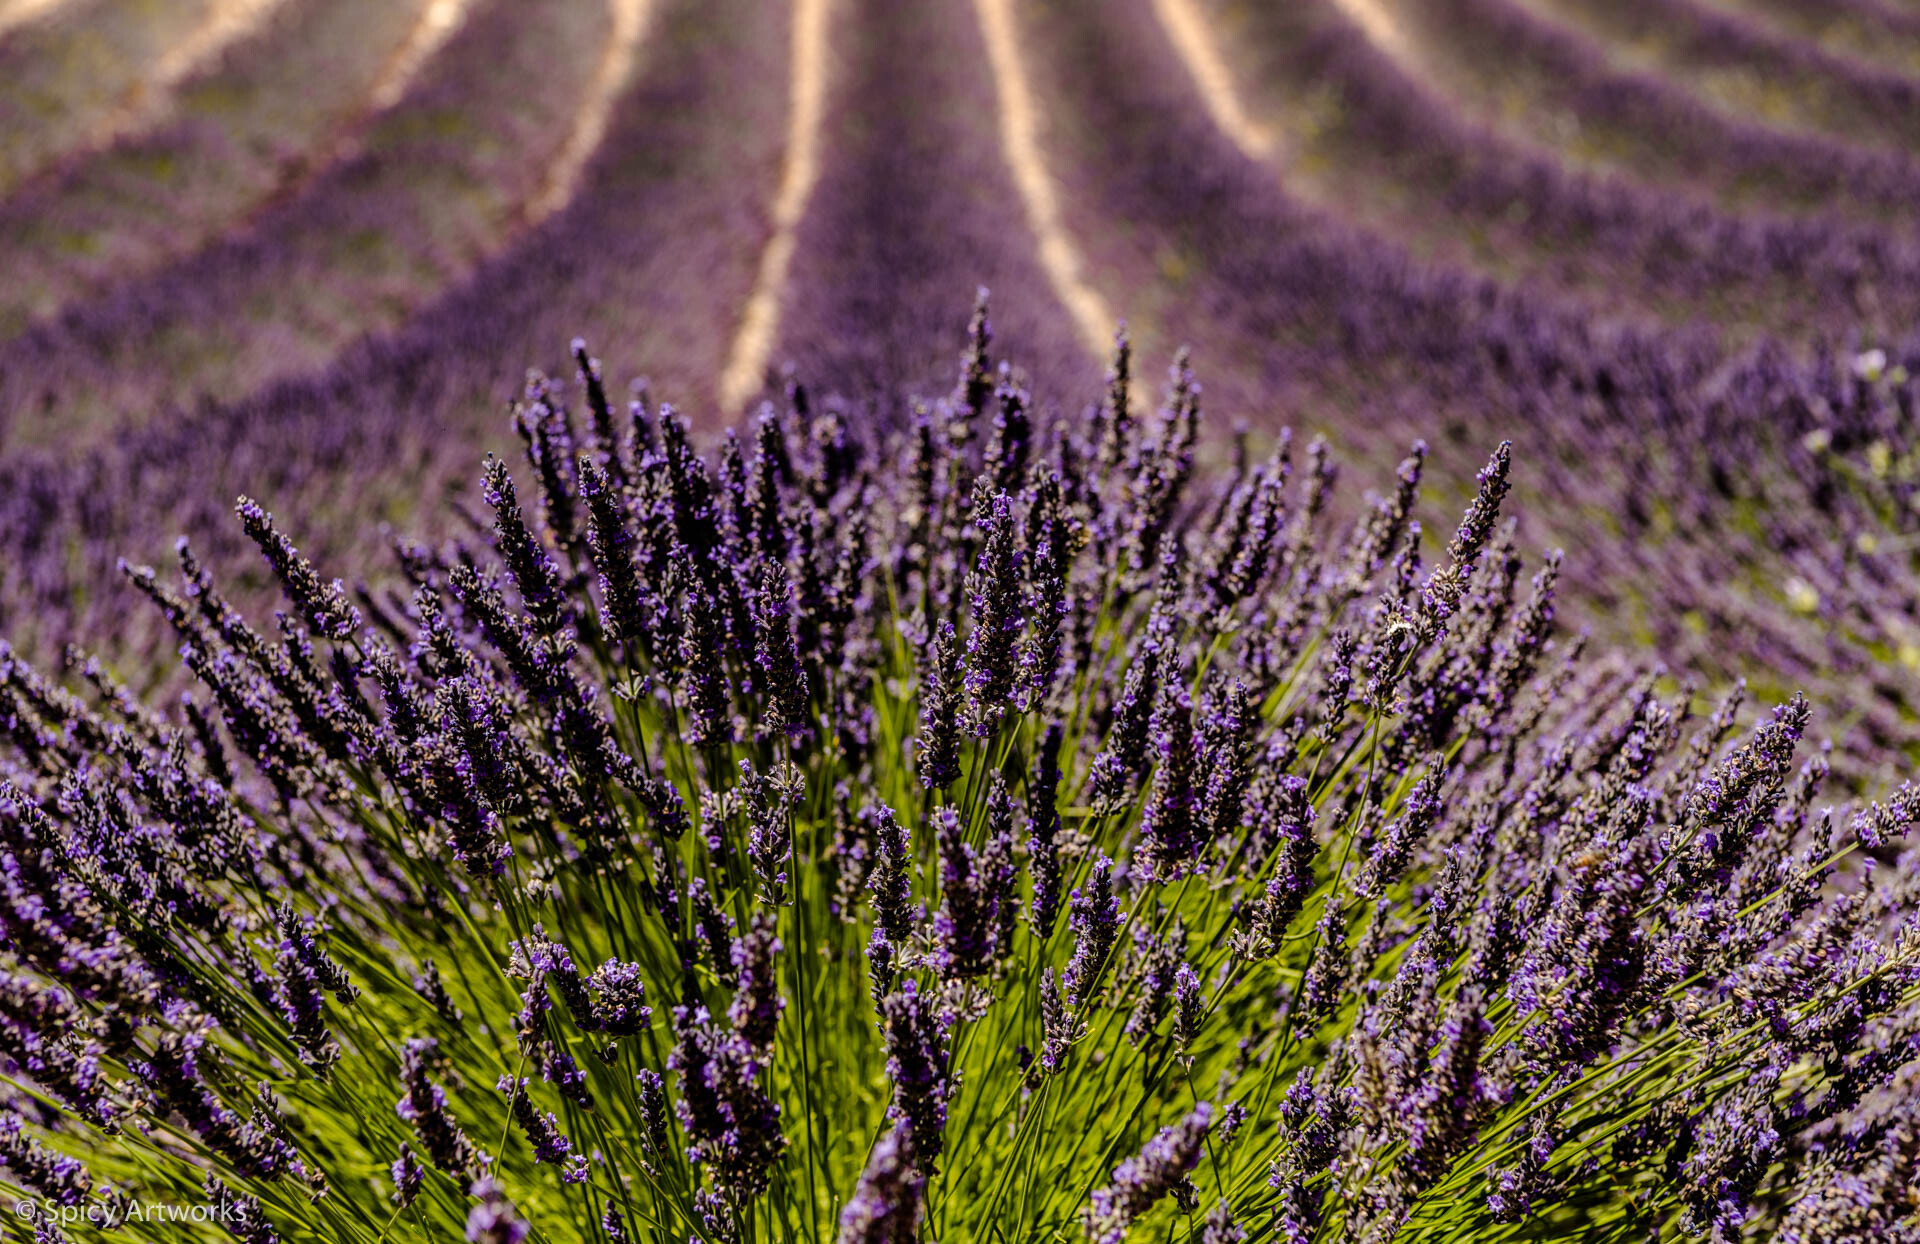 THE COLOR OF PURPLE OR THE PERFUME OF THE FIELDS - PROVENCE 2017 - Part 1: Between Lavender fields and vineyards